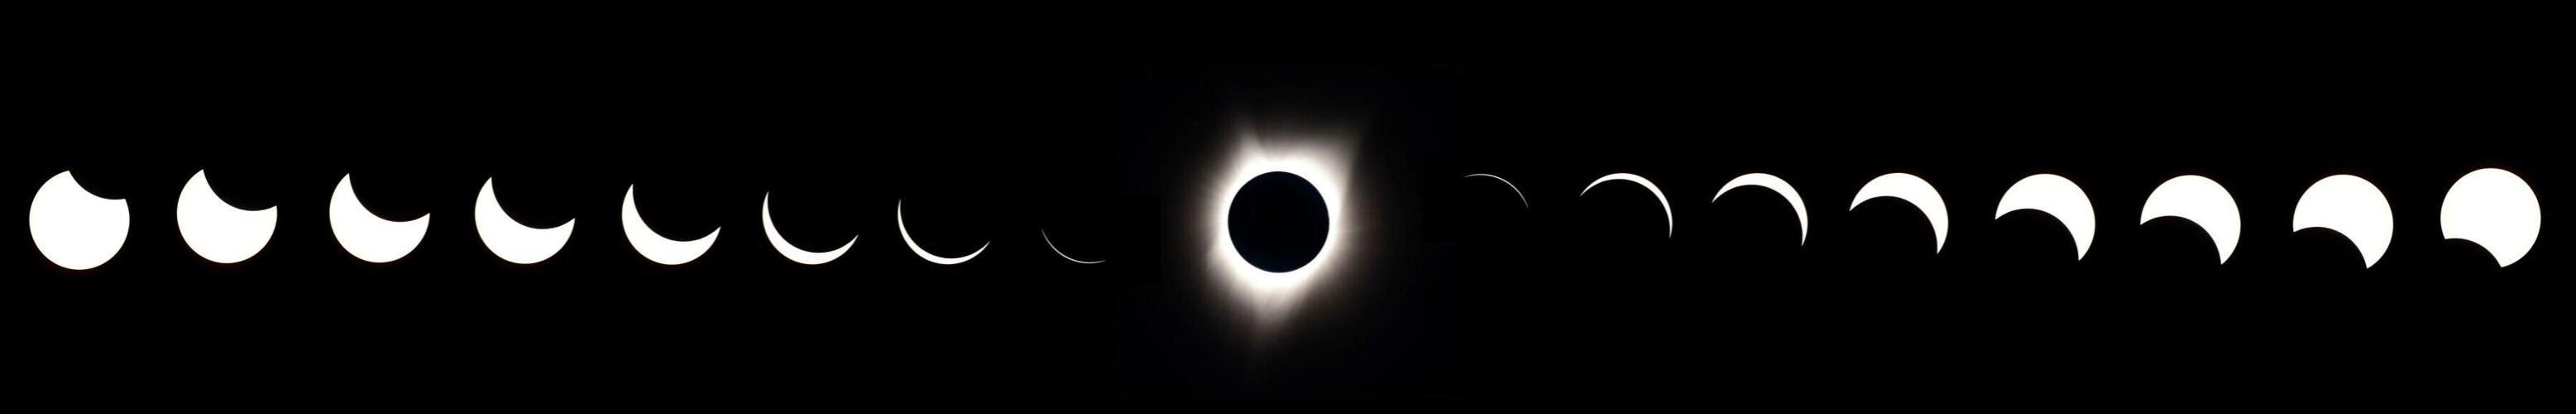 Total Eclipse sequence 2017